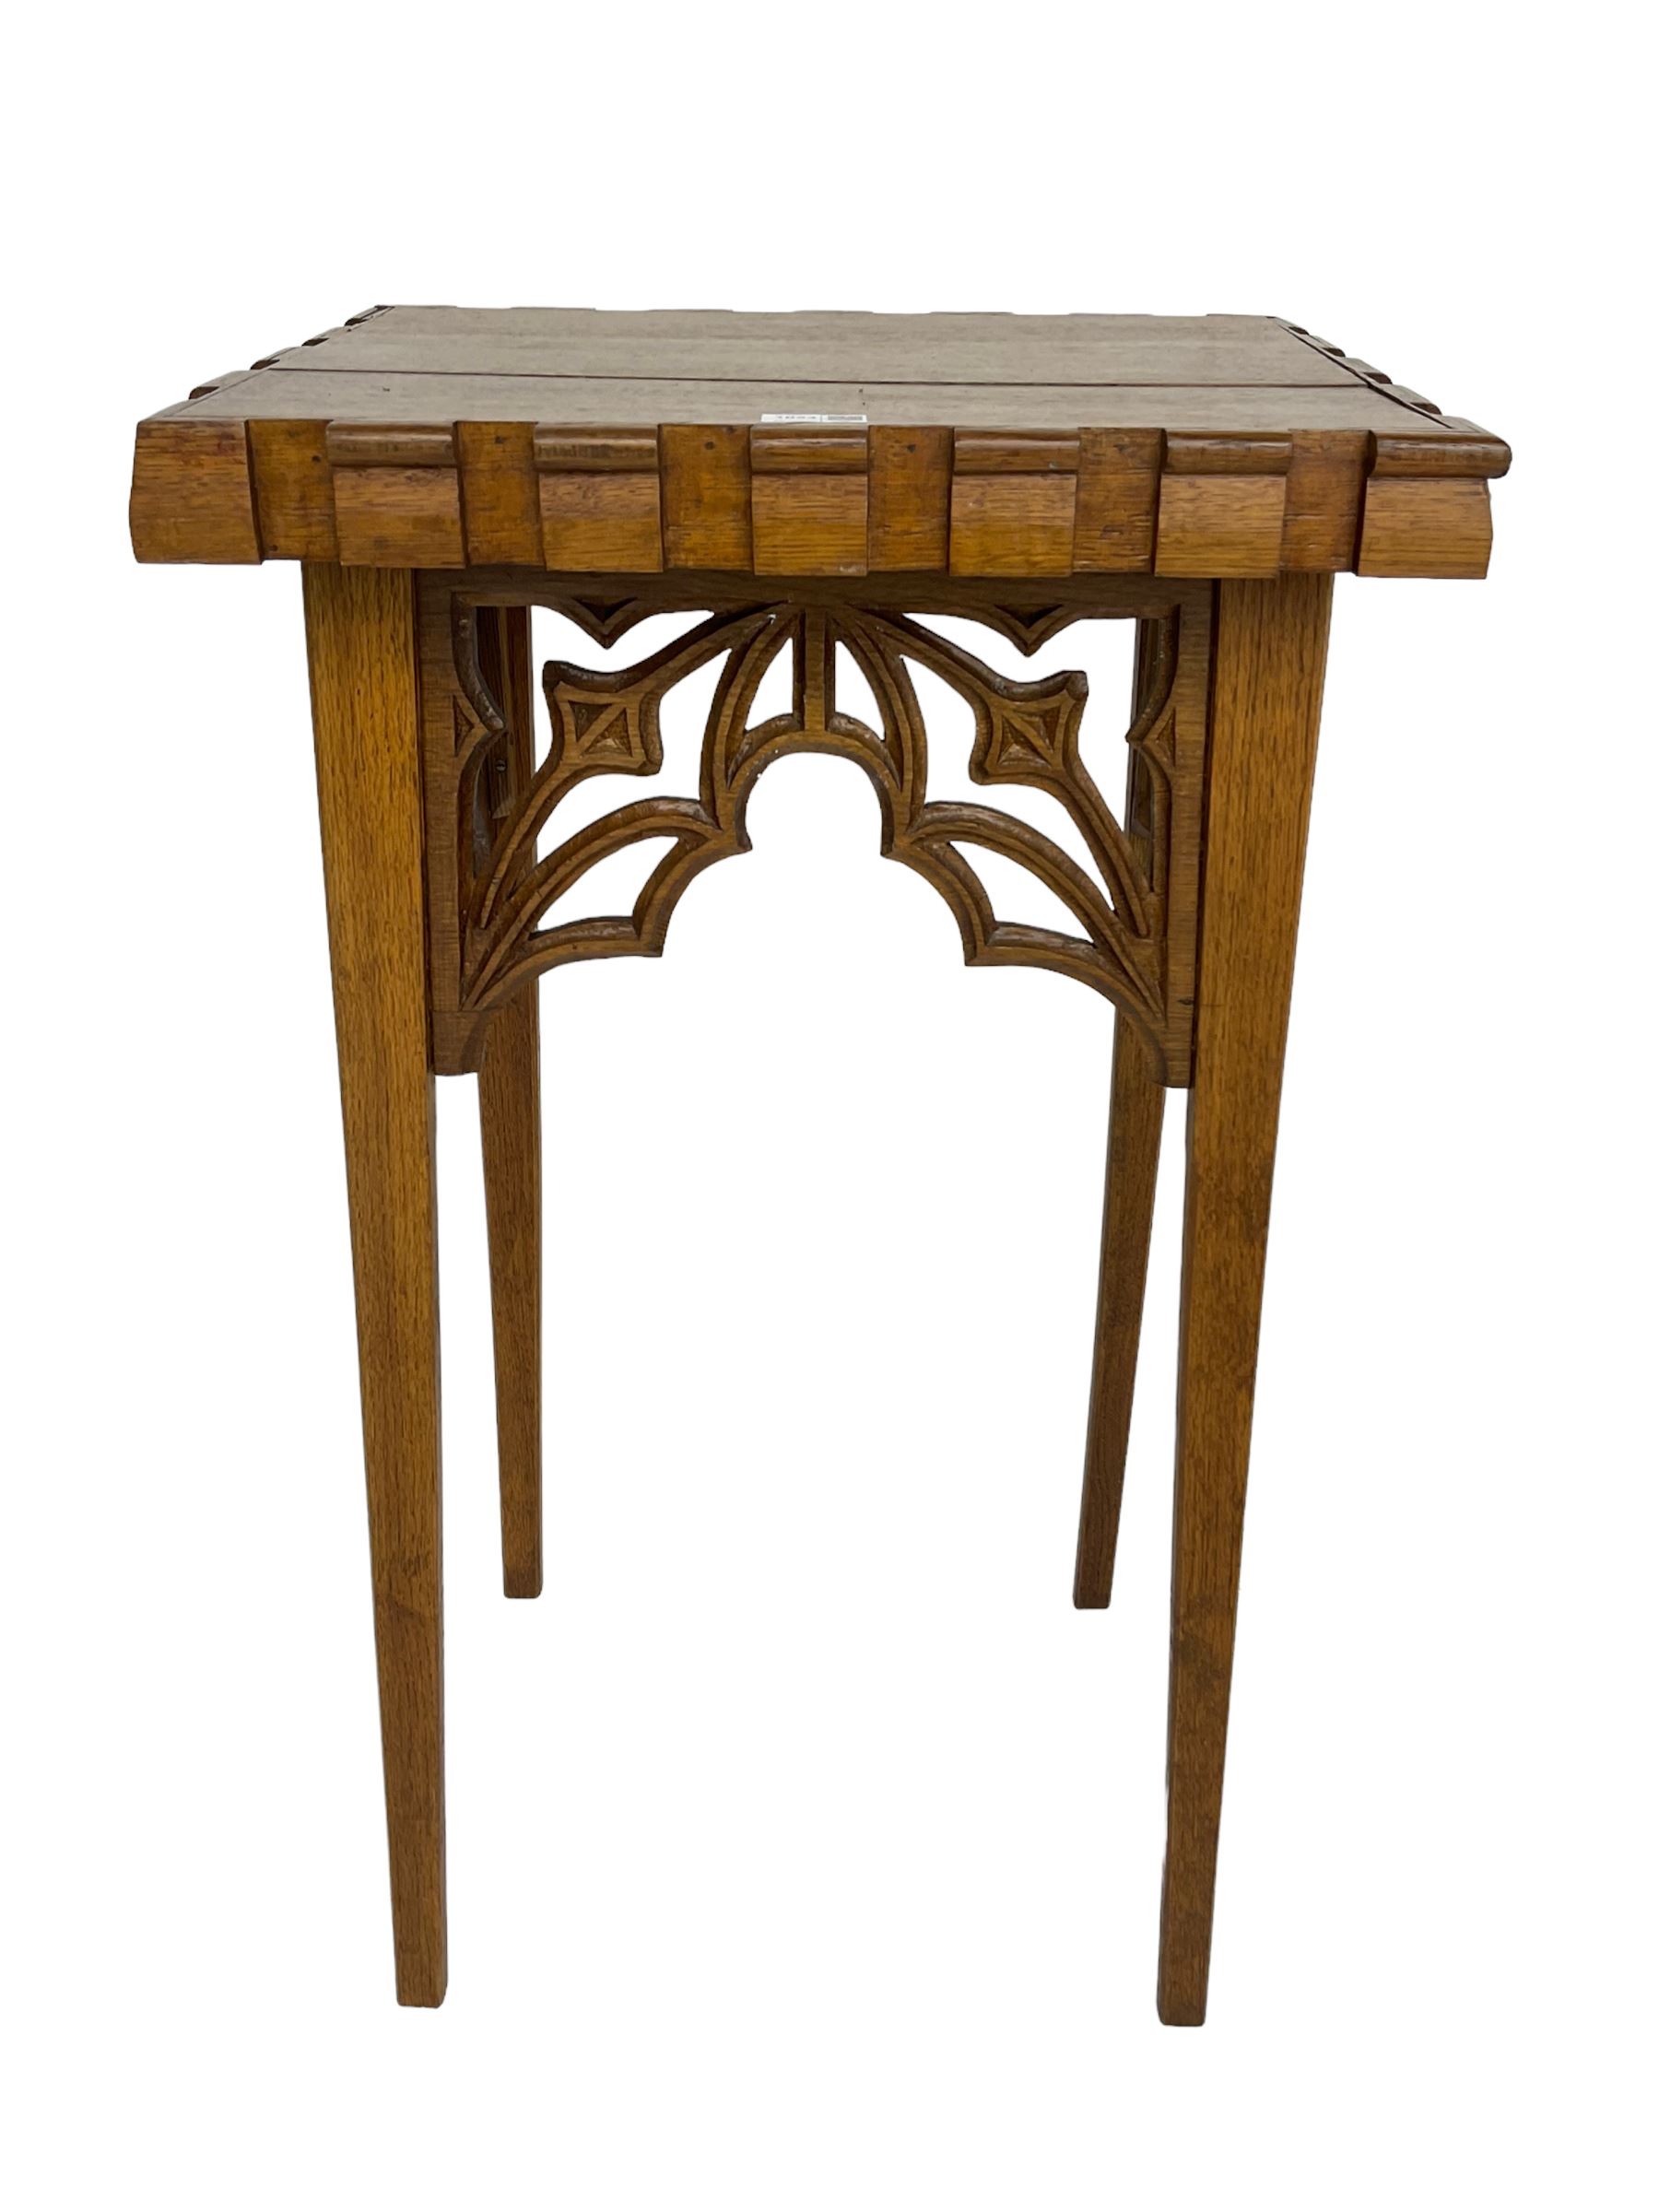 20th century ecclesiastical Gothic style oak stand